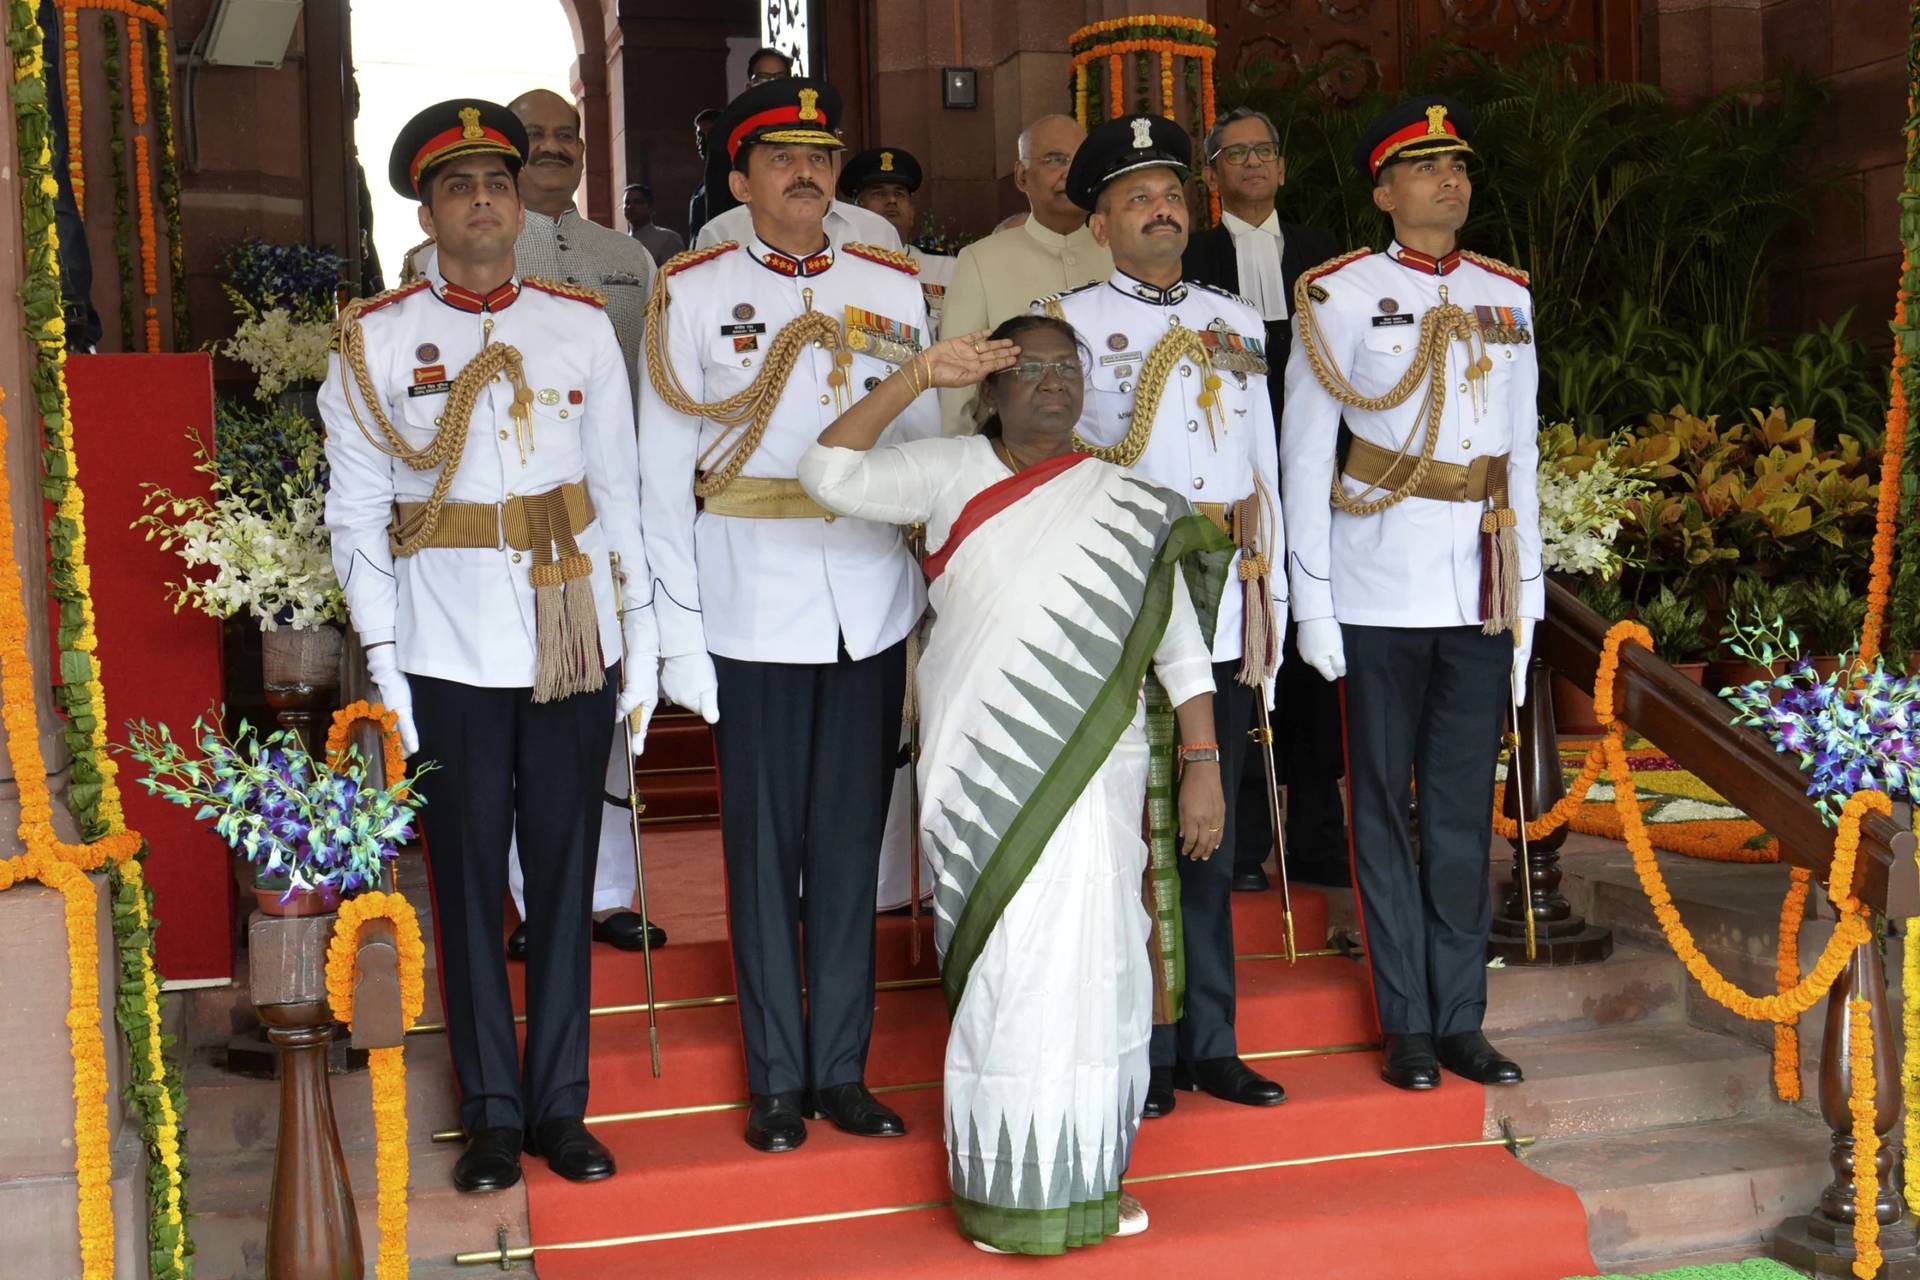 In this photograph released by India’s Presidential Palace, India’s new president Draupadi Murmu, salutes as she receives a guard of honor during her swearing in ceremony in New Delhi, India, July 25, 2022. India’s president on Thursday inaugurated a new parliament session after the national election, listing priorities of Prime Minister Narendra Modi’s government in coming years, including fast-tracking economic reforms and boosting small and medium enterprises to create jobs.( Credit: India’s Presidential Palace via AP.)